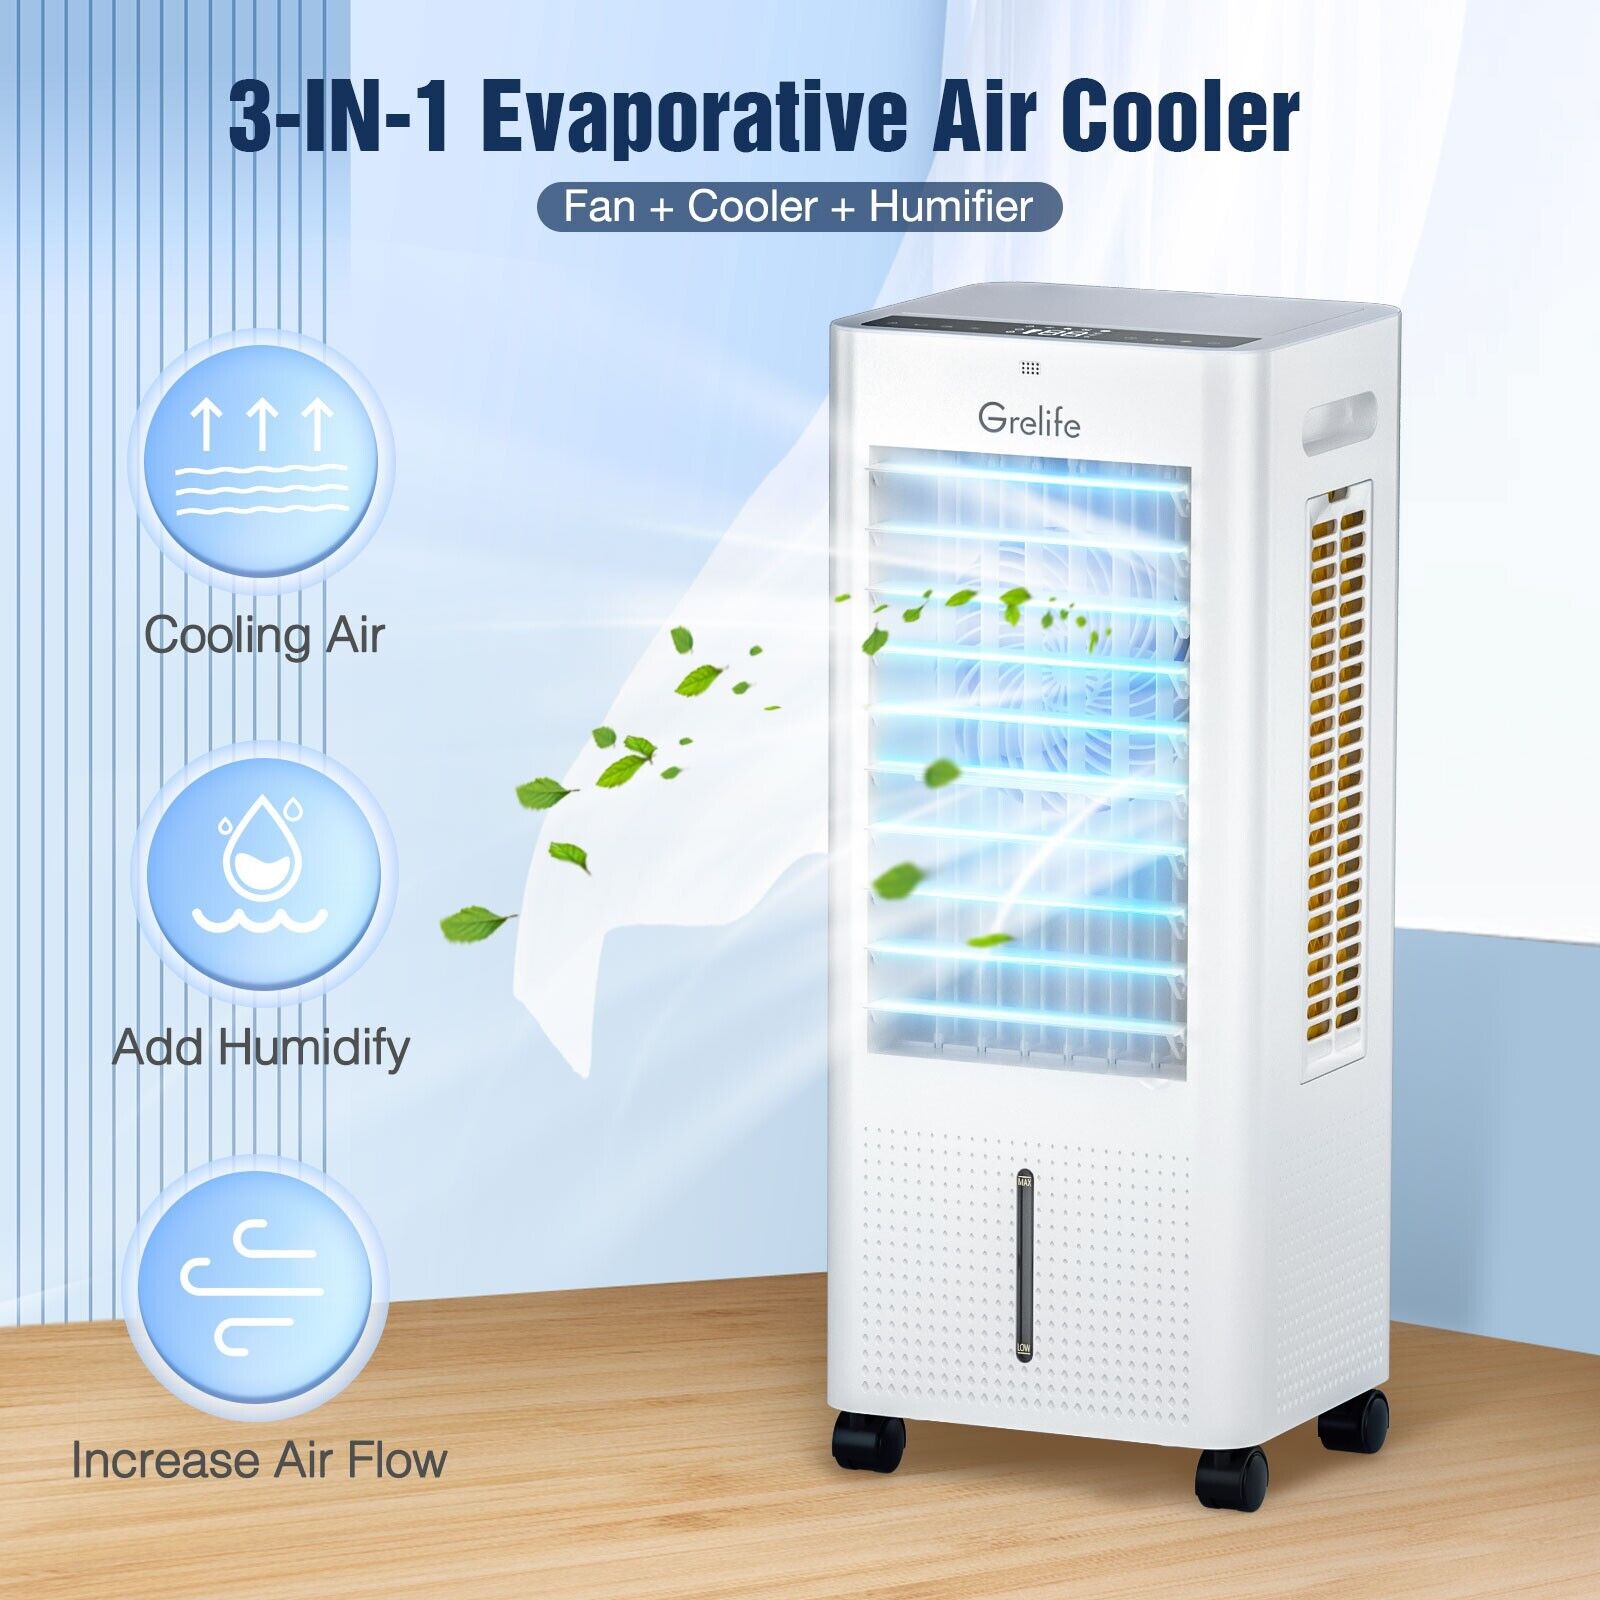 Evaporative Air Cooler Portable Cooling Fan w/ Humidifier Remote Control Home